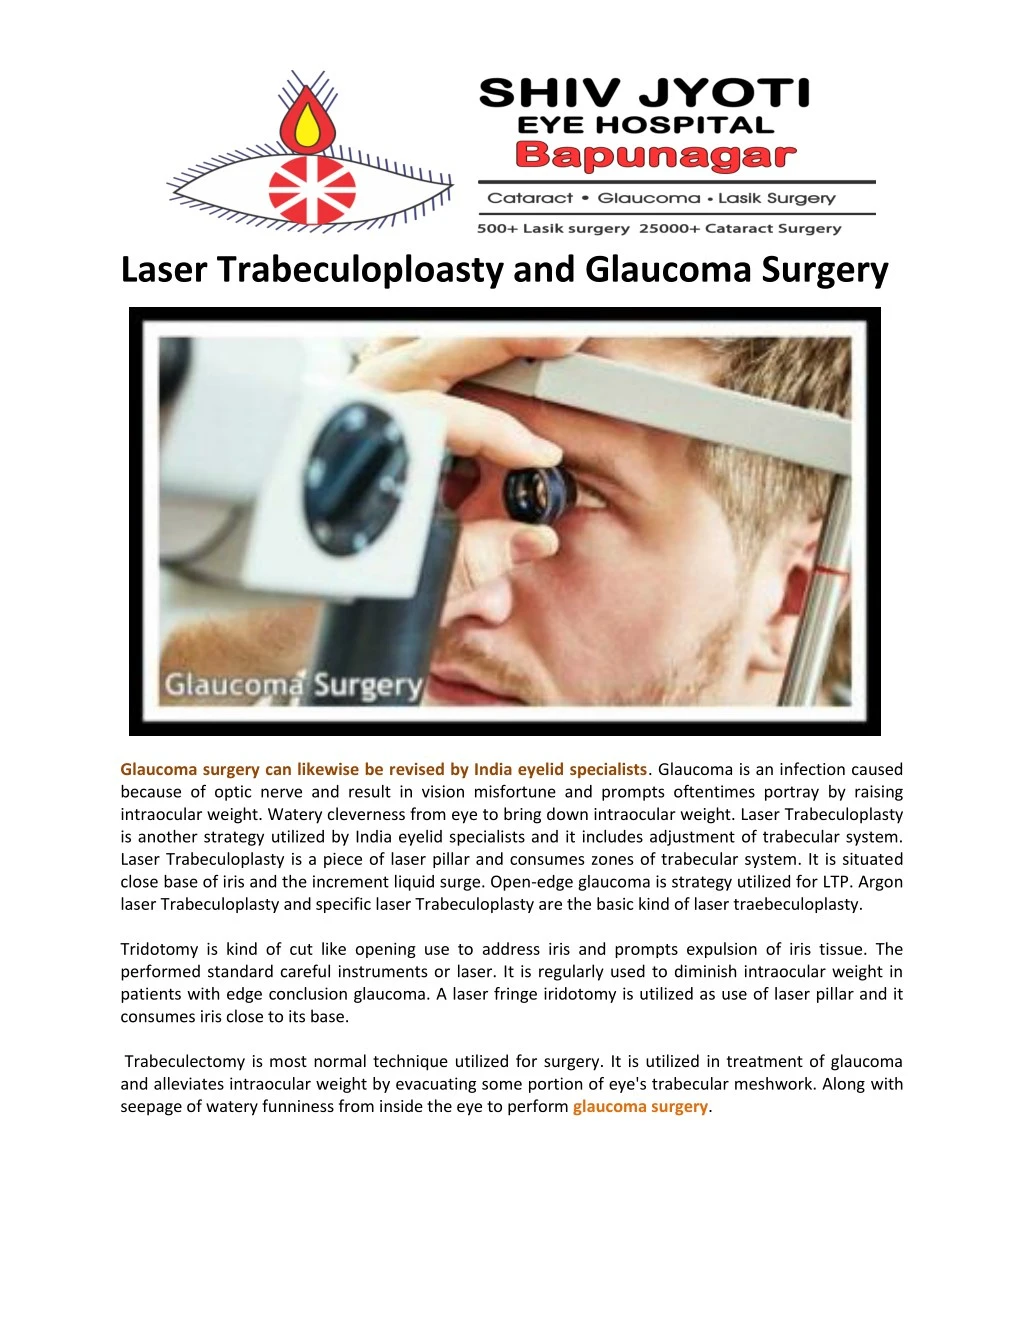 laser trabeculoploasty and glaucoma surgery